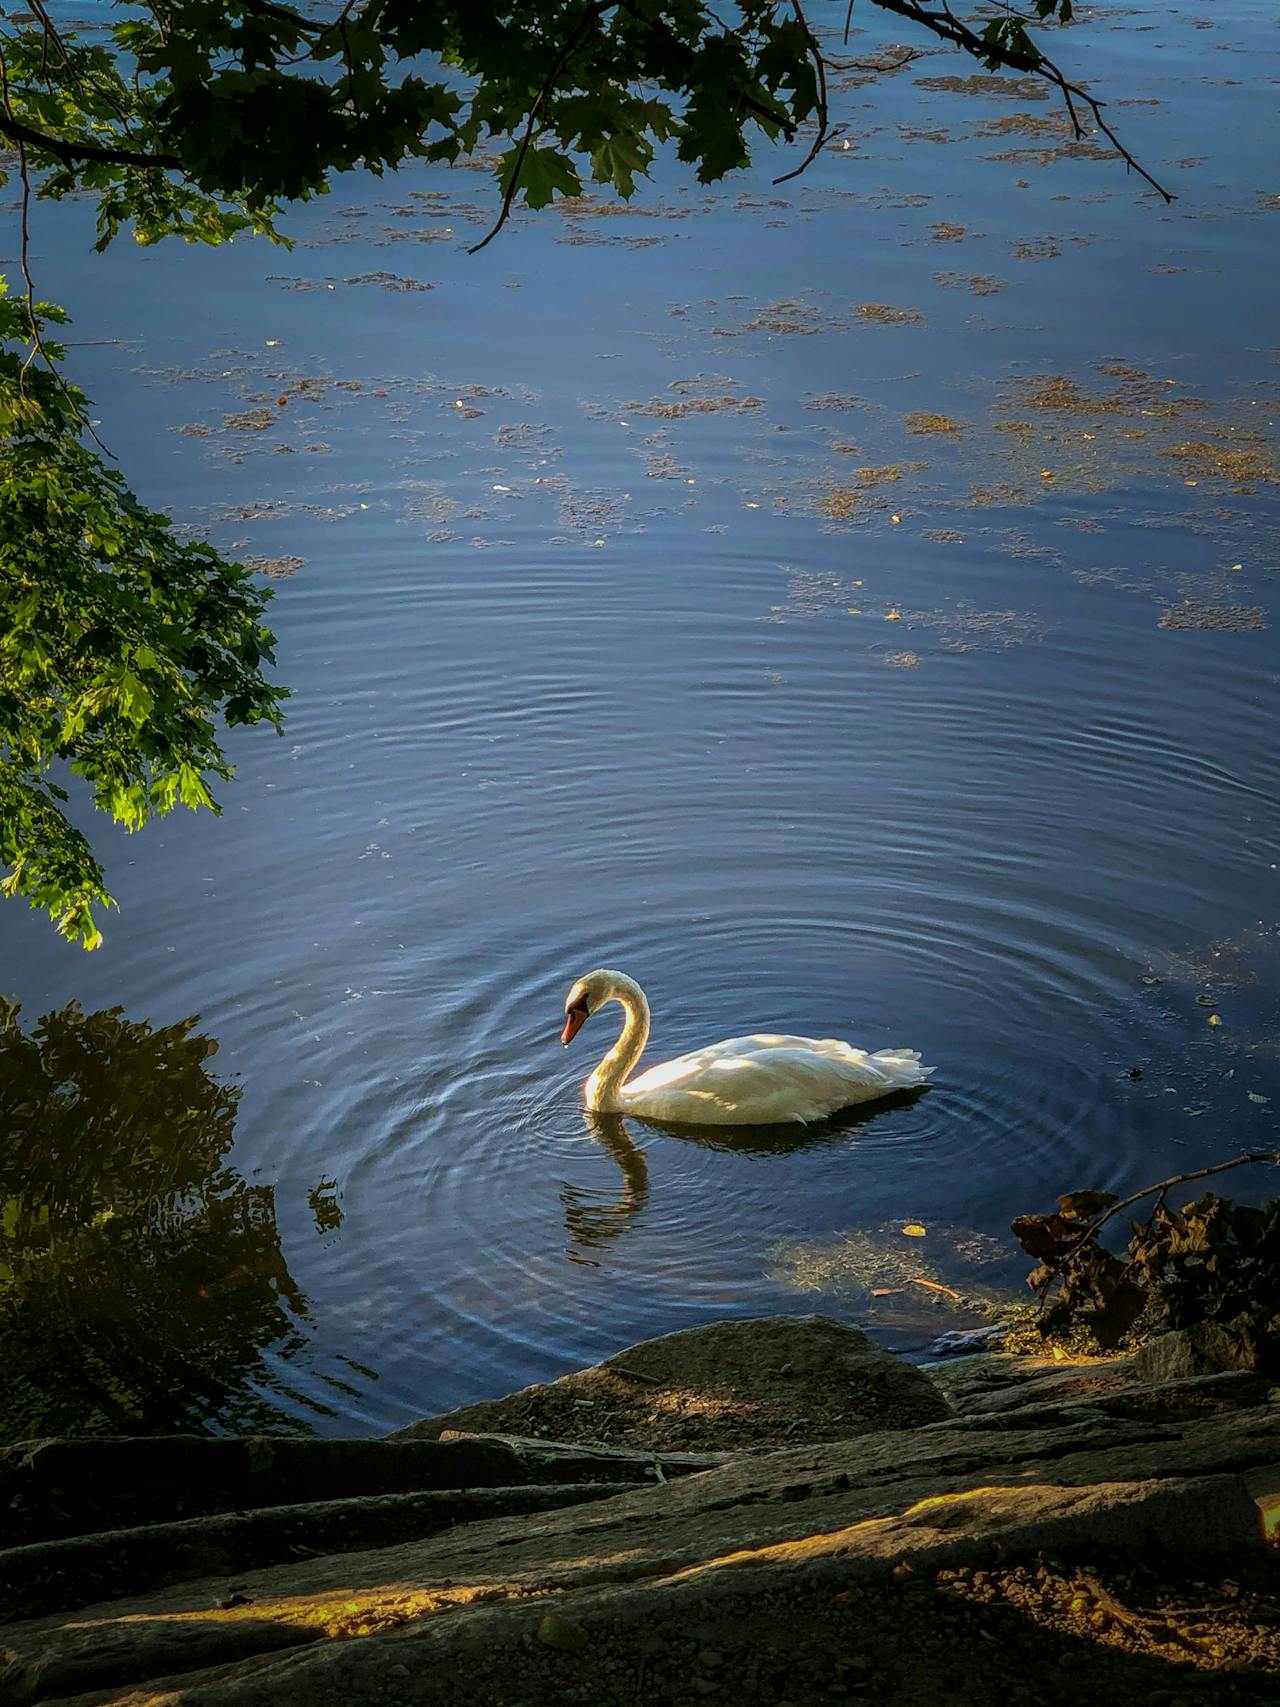 A beautiful swan enjoying the serene waters of Somerville